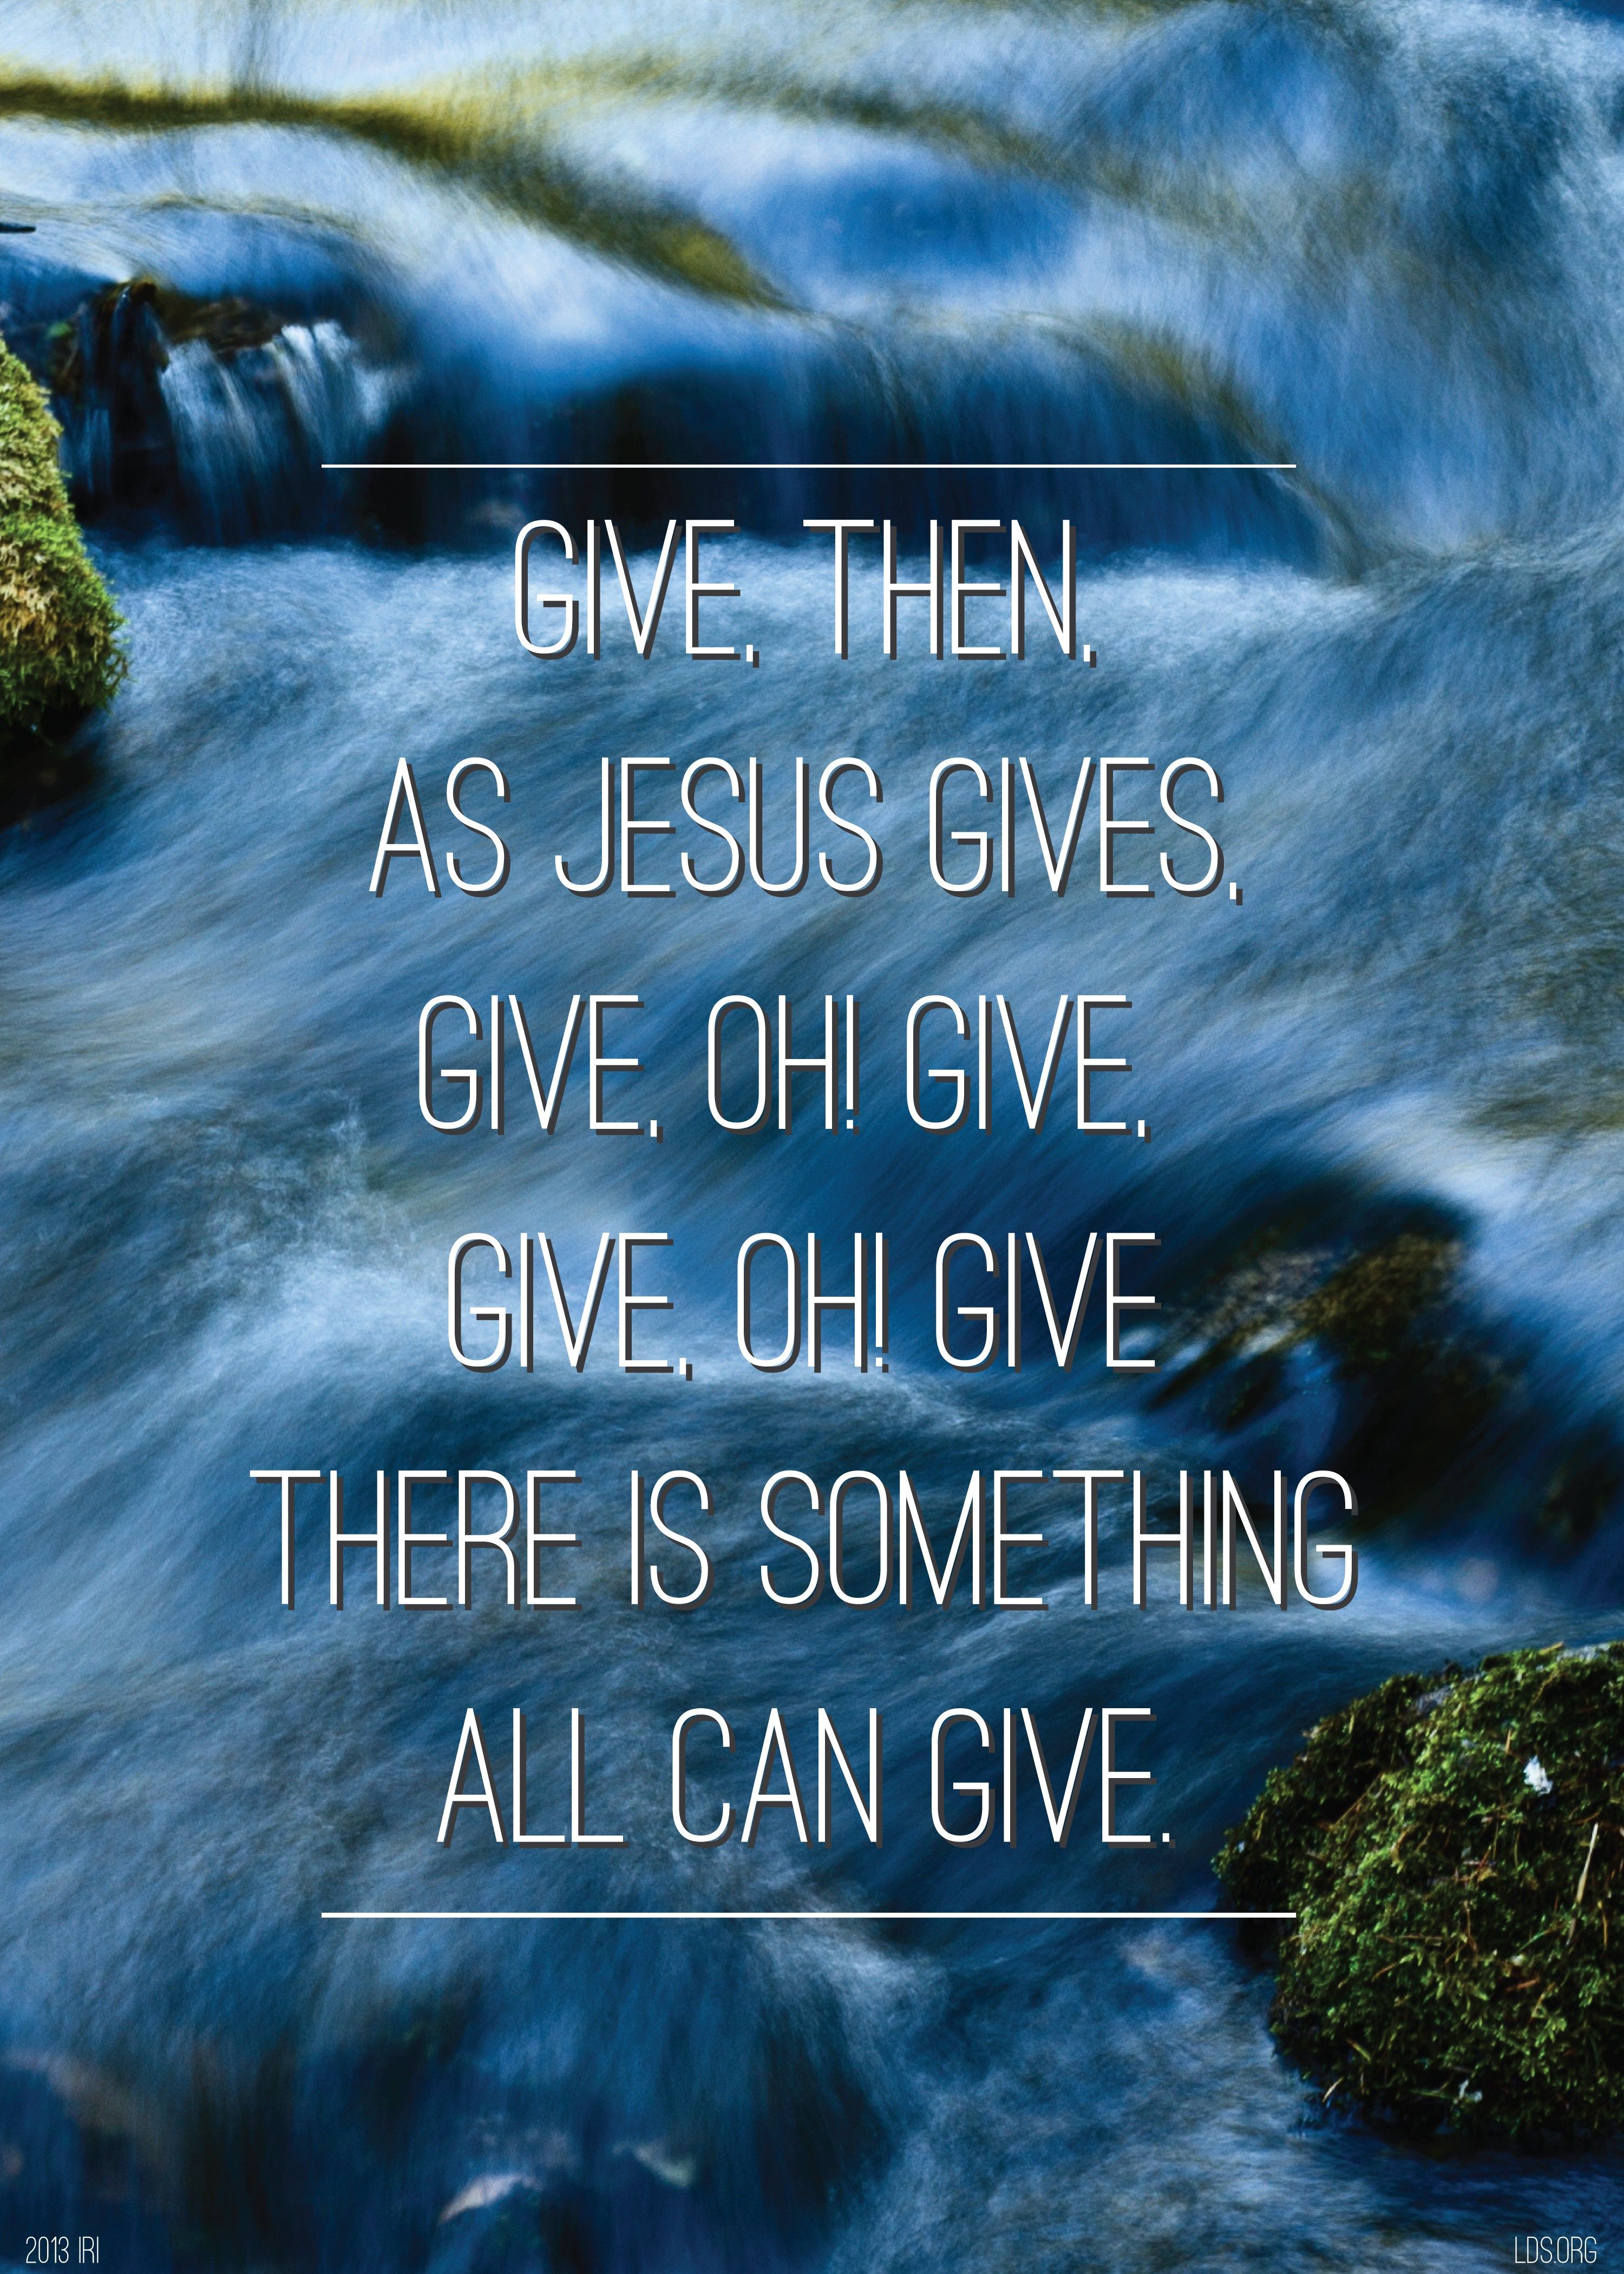 “Give, then, as Jesus gives; there is something all can give.”—Children’s Songbook, 236, “‘Give,’ Said the Little Stream.’” © undefined ipCode 1.